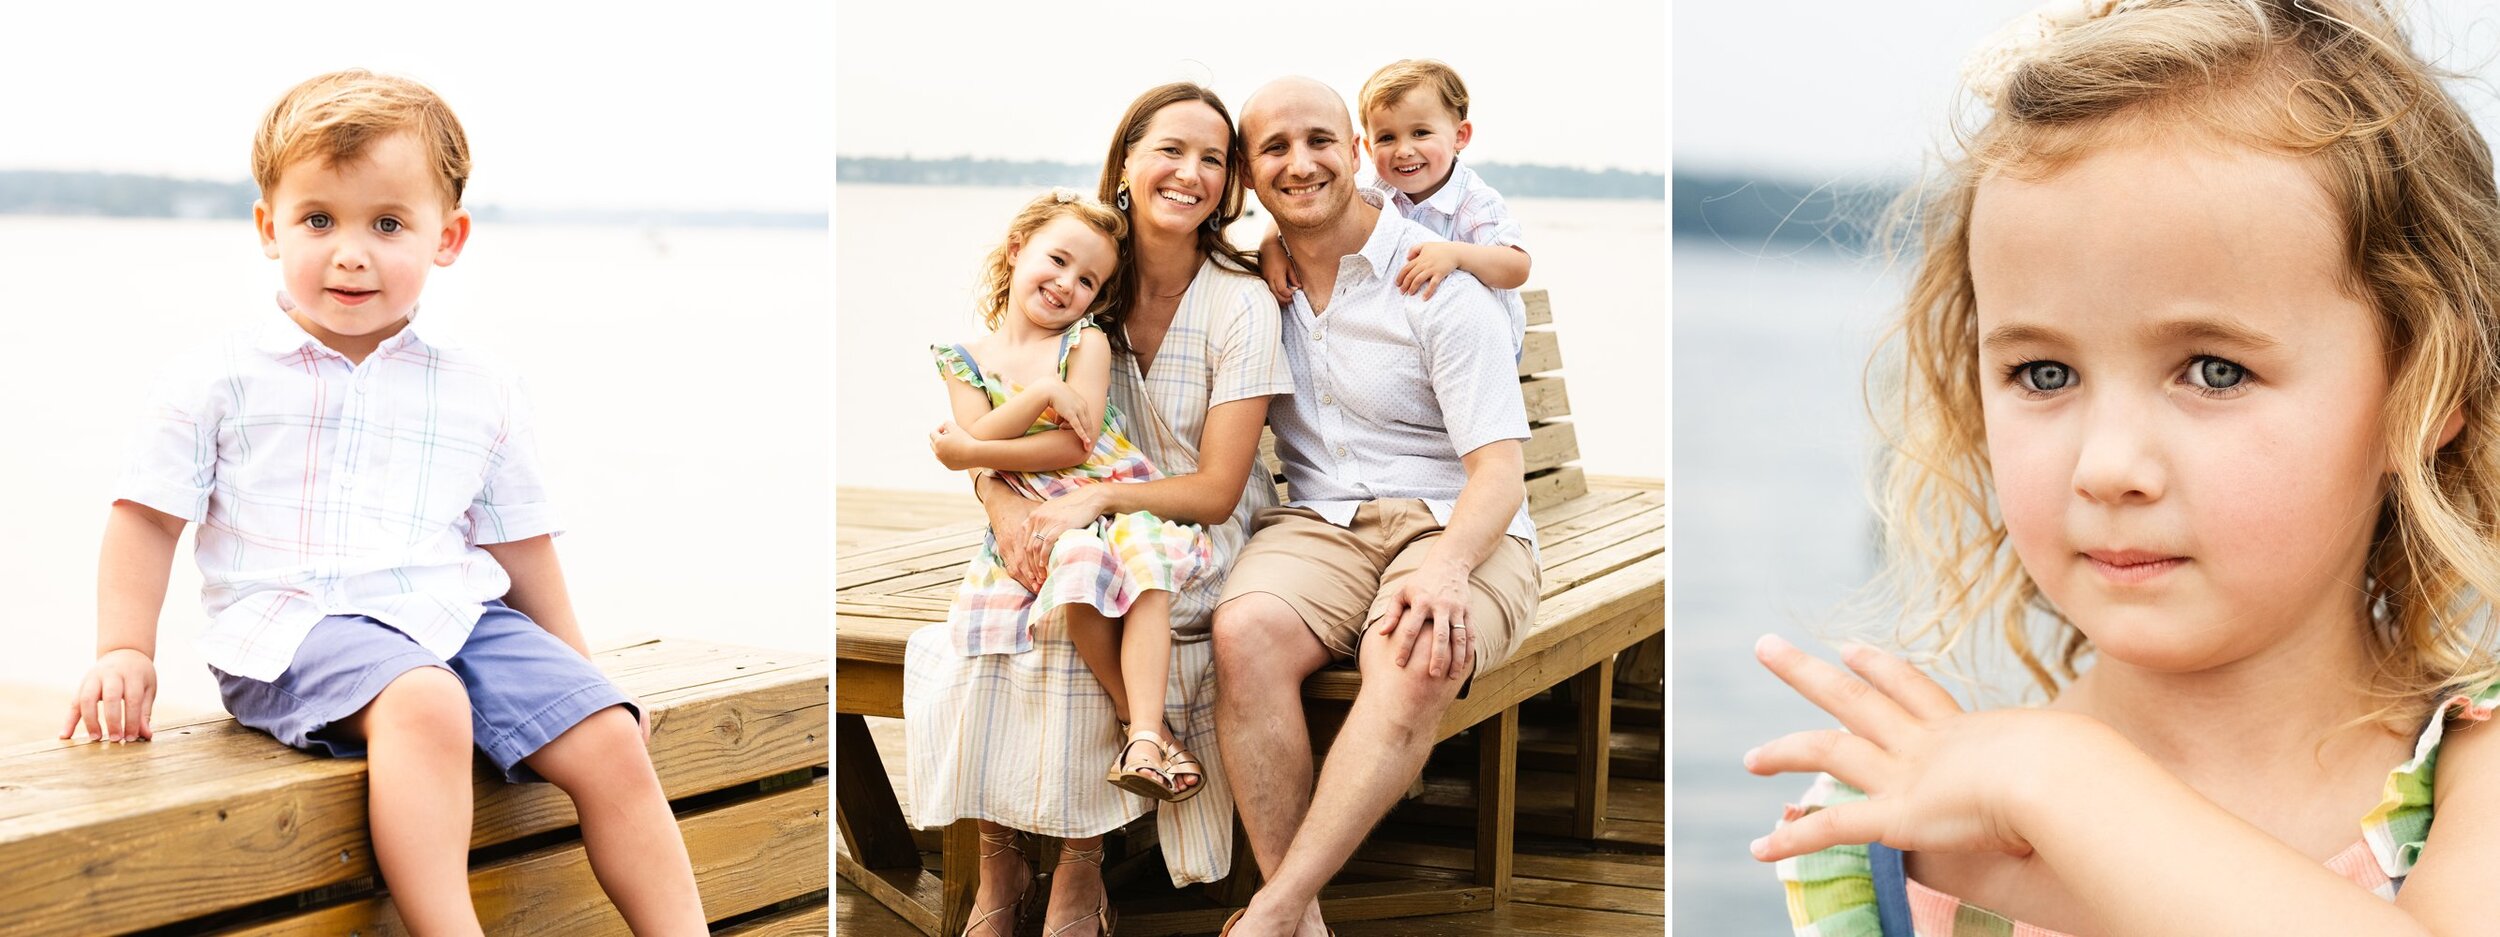 adorable_family_photos_on_dock_by_water_in_annapolis_md.jpg